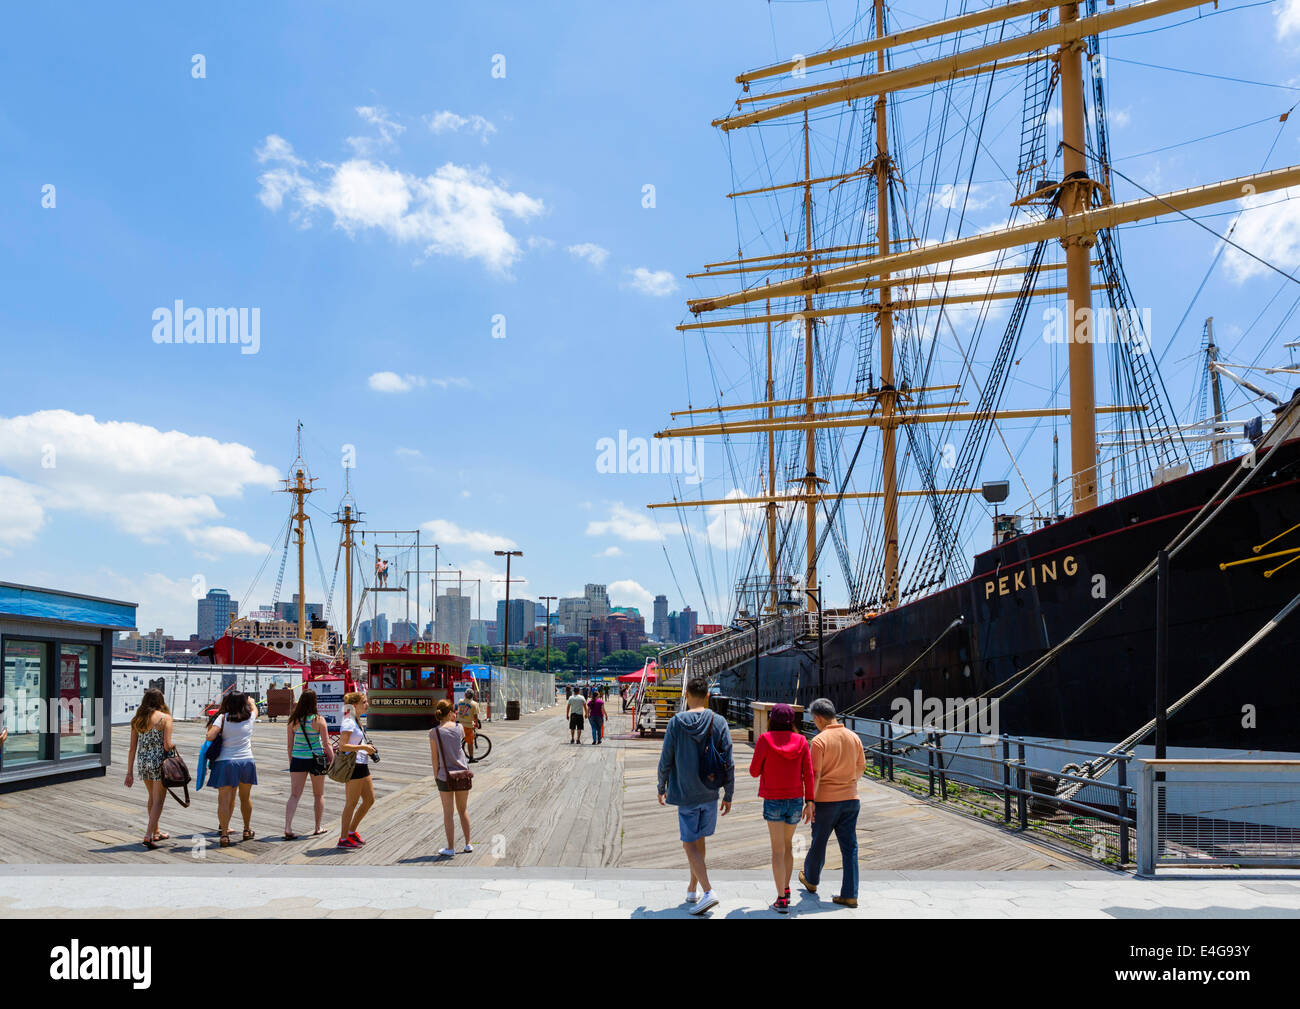 Four-masted barque Peking at Pier 16 with Brooklyn skyline in distance, South Street Seaport, Manhattan, New York City, NY, USA Stock Photo